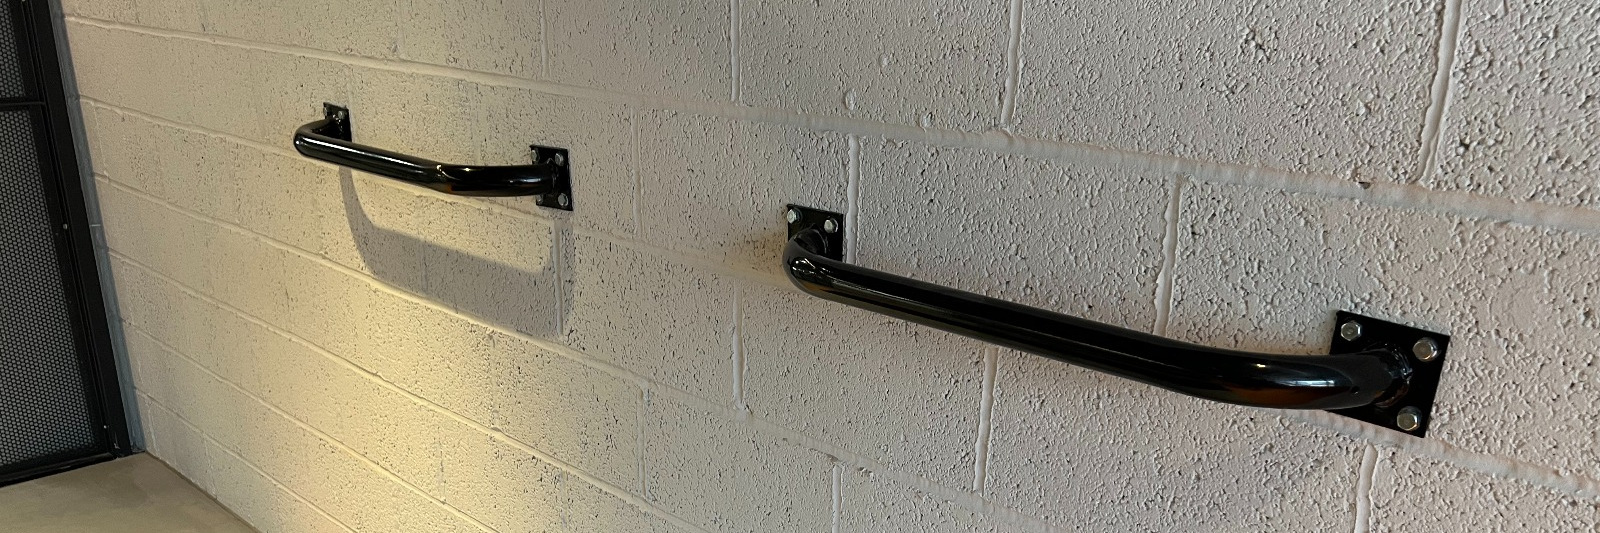 Bike Dock Solutions Wall Mounted Sheffield Bike Stand in a residential corridor